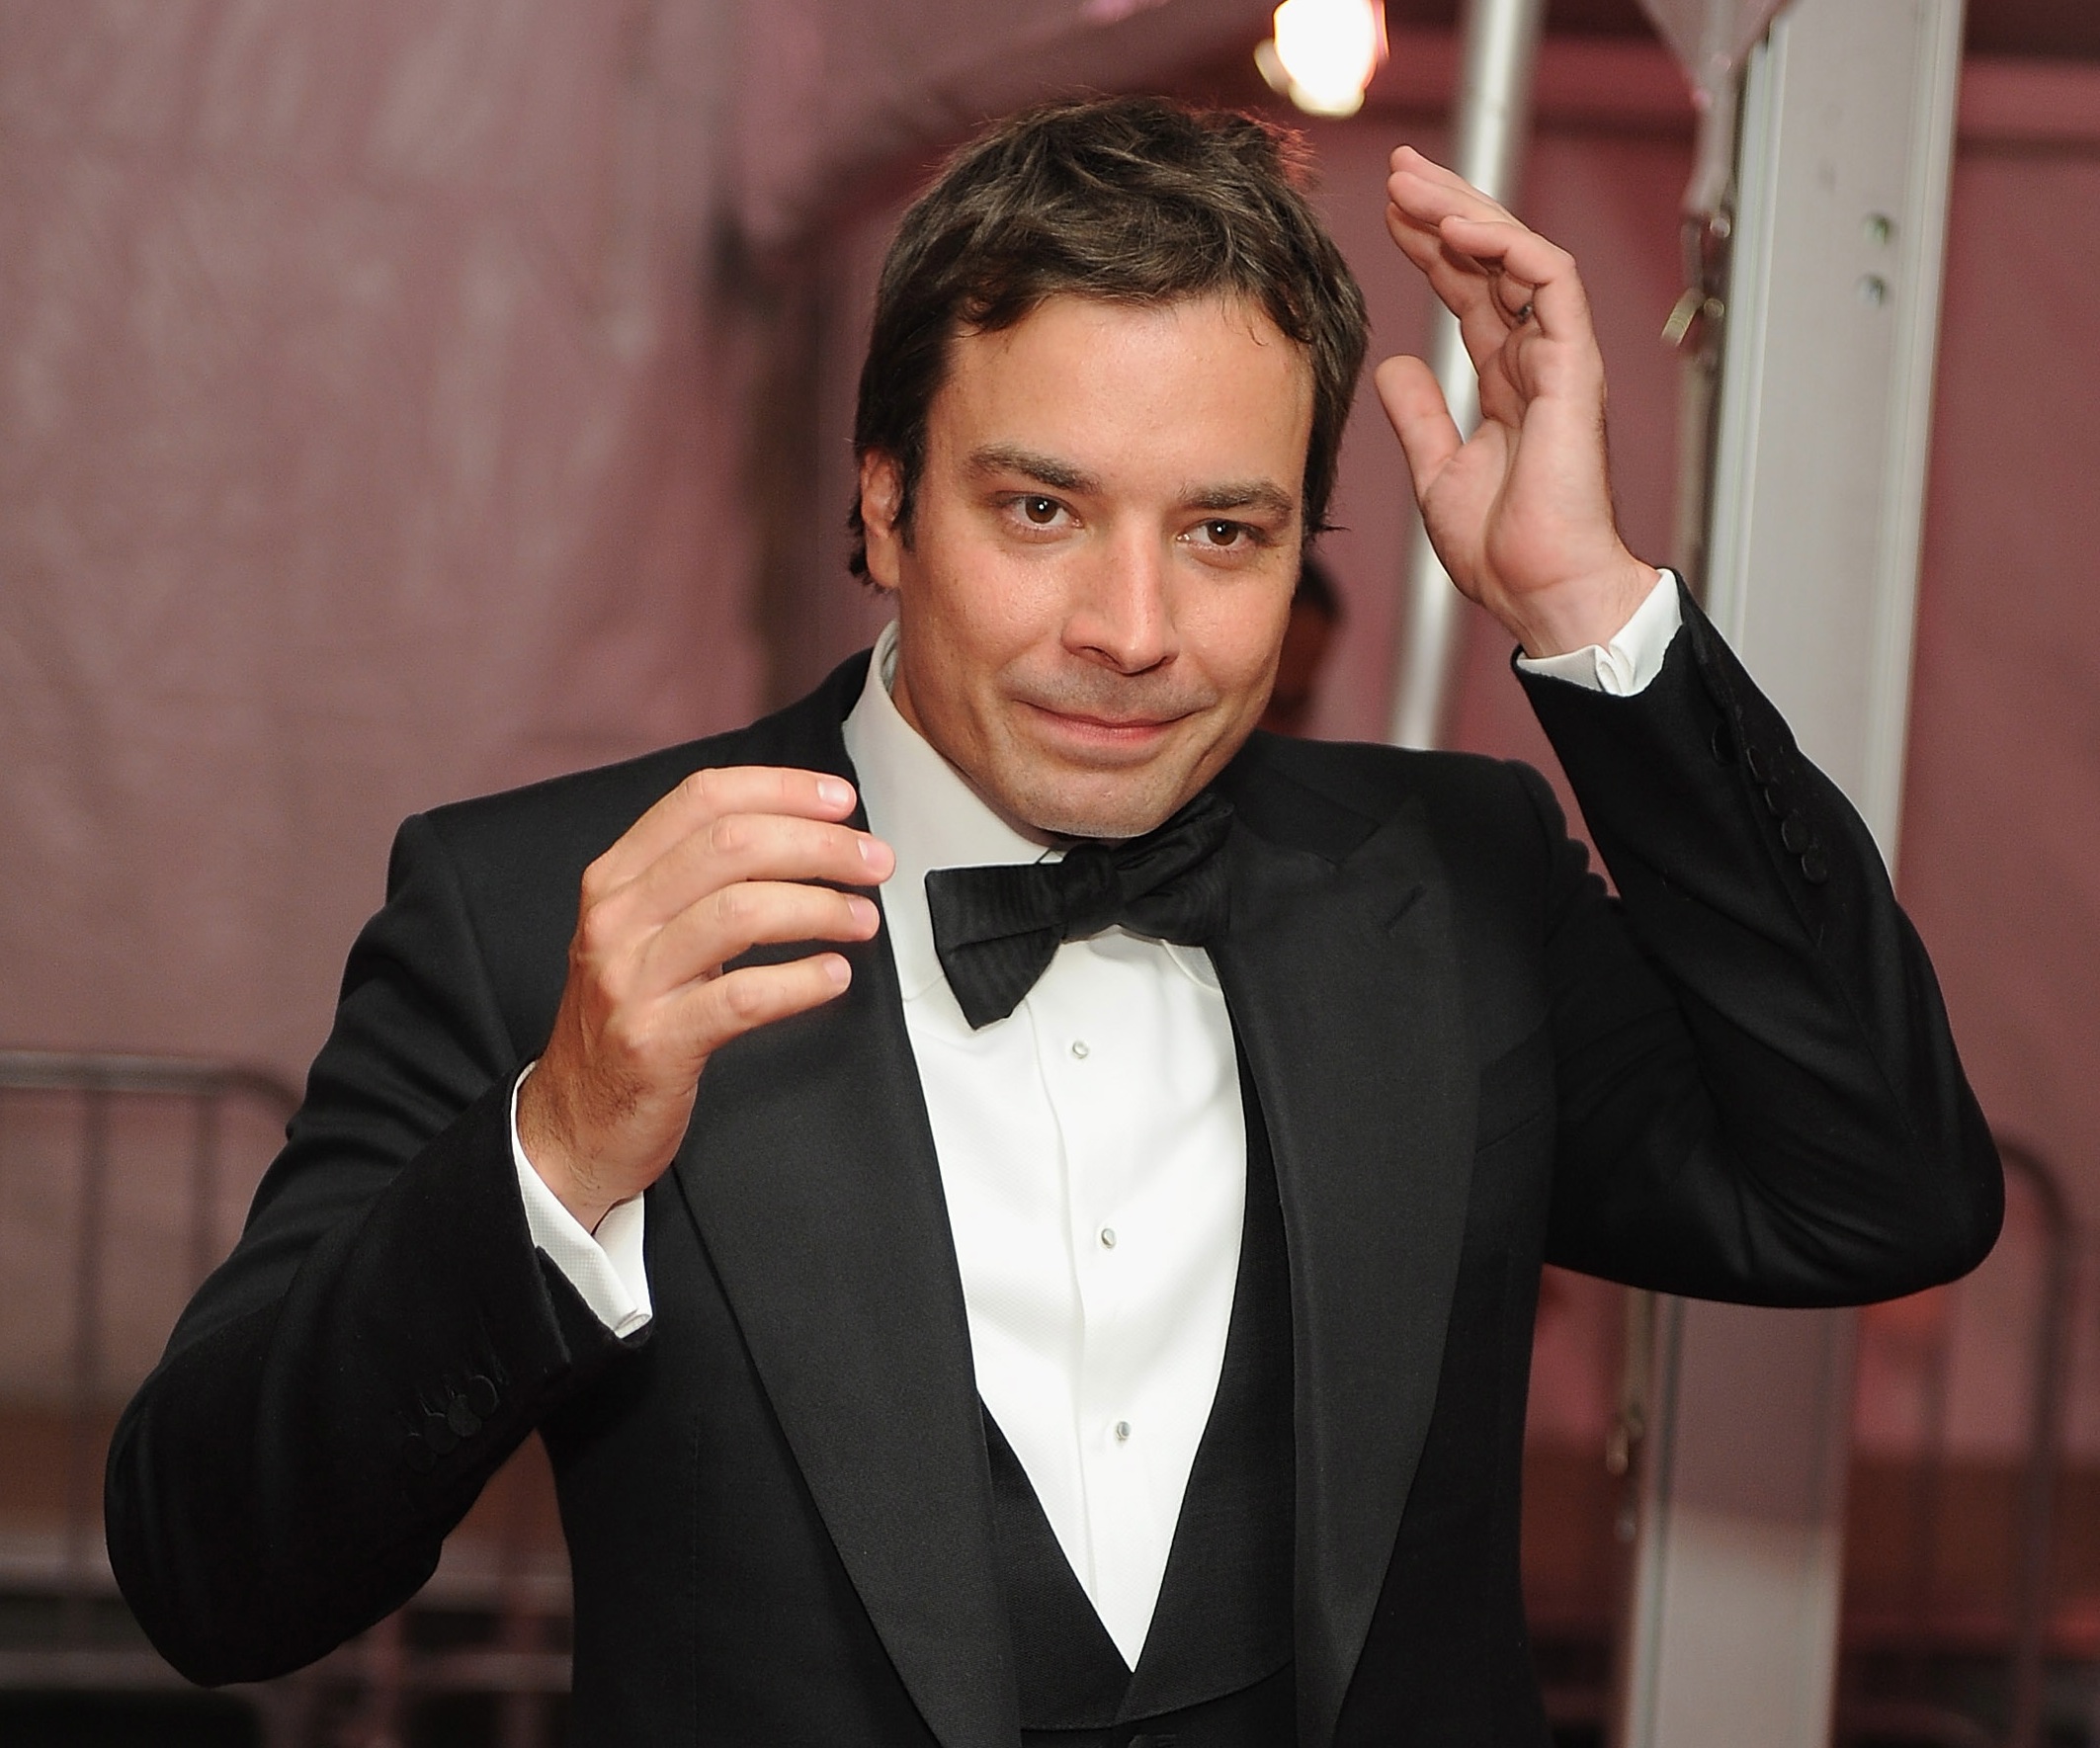 Jimmy Fallon Wallpaper 98 images in Collection Page 3